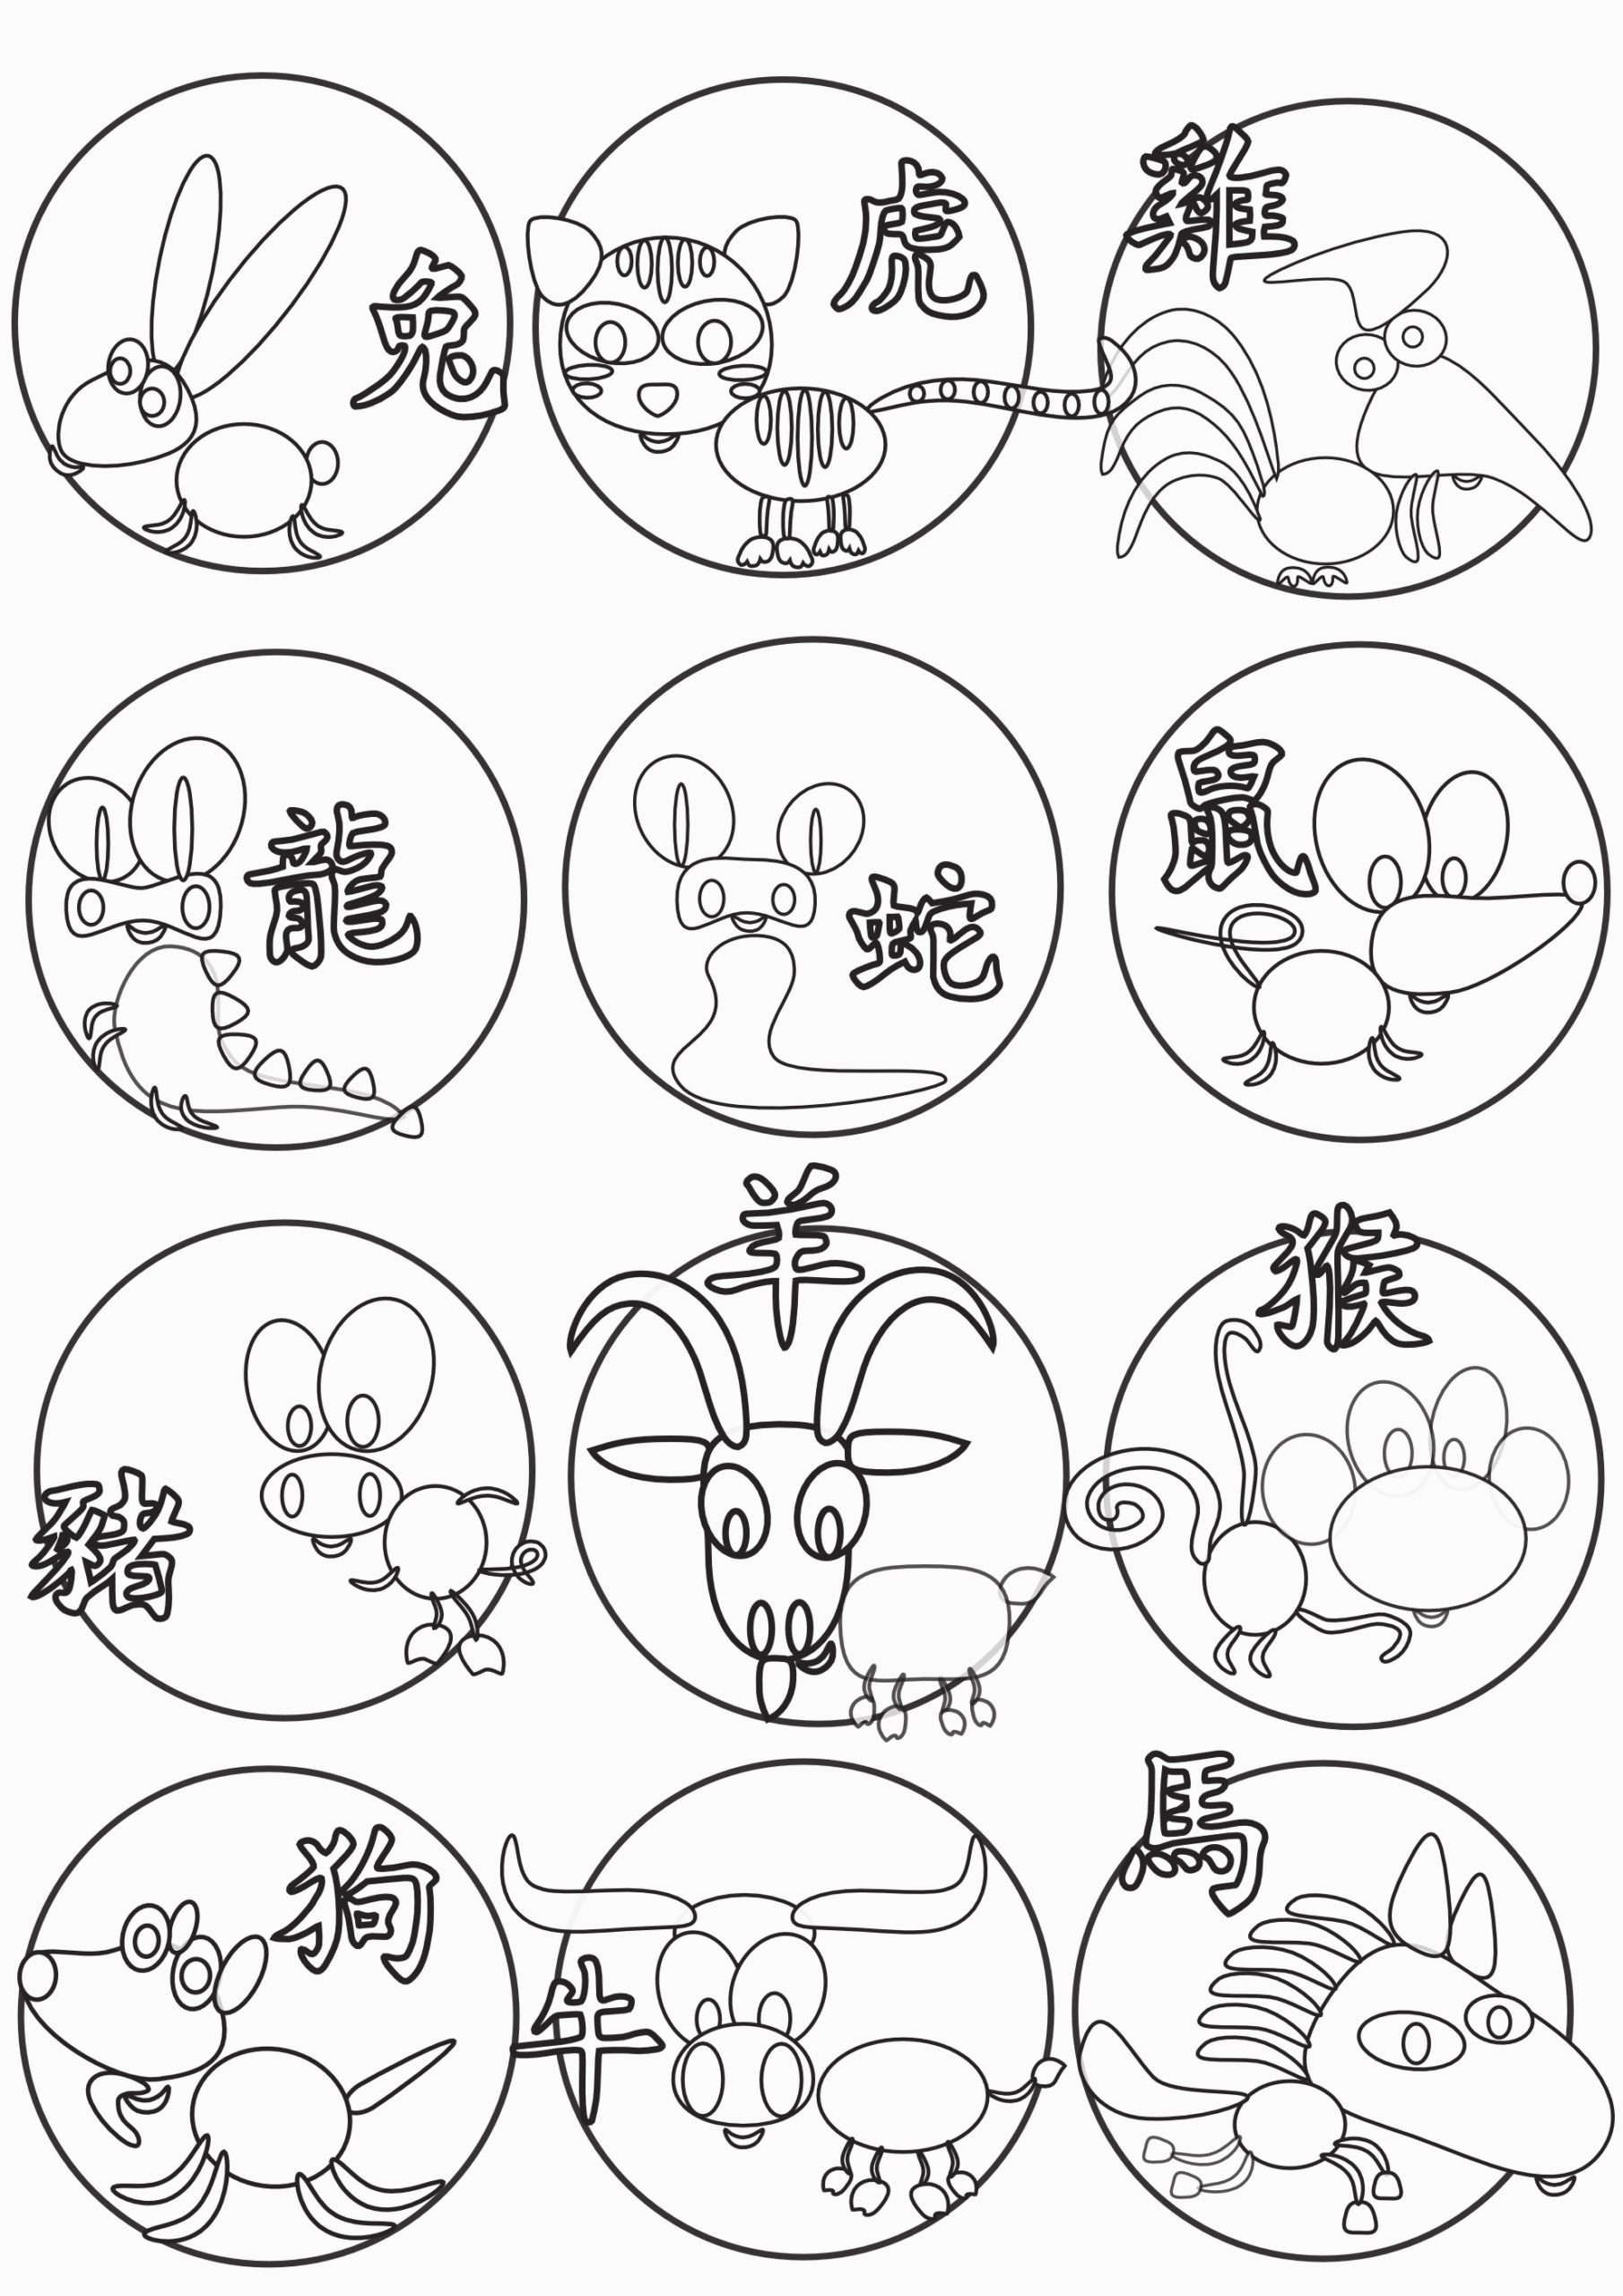 Coloring Pages : Chinese New Year Coloring Home Free Printable Zodiac Signs  9cpbxeryi Math Worksheets Algebra Middle Grades Star Games Rate Problems  Mathematics Funny Questions Grade Applied. Free Printable Zodiac Signs.  English